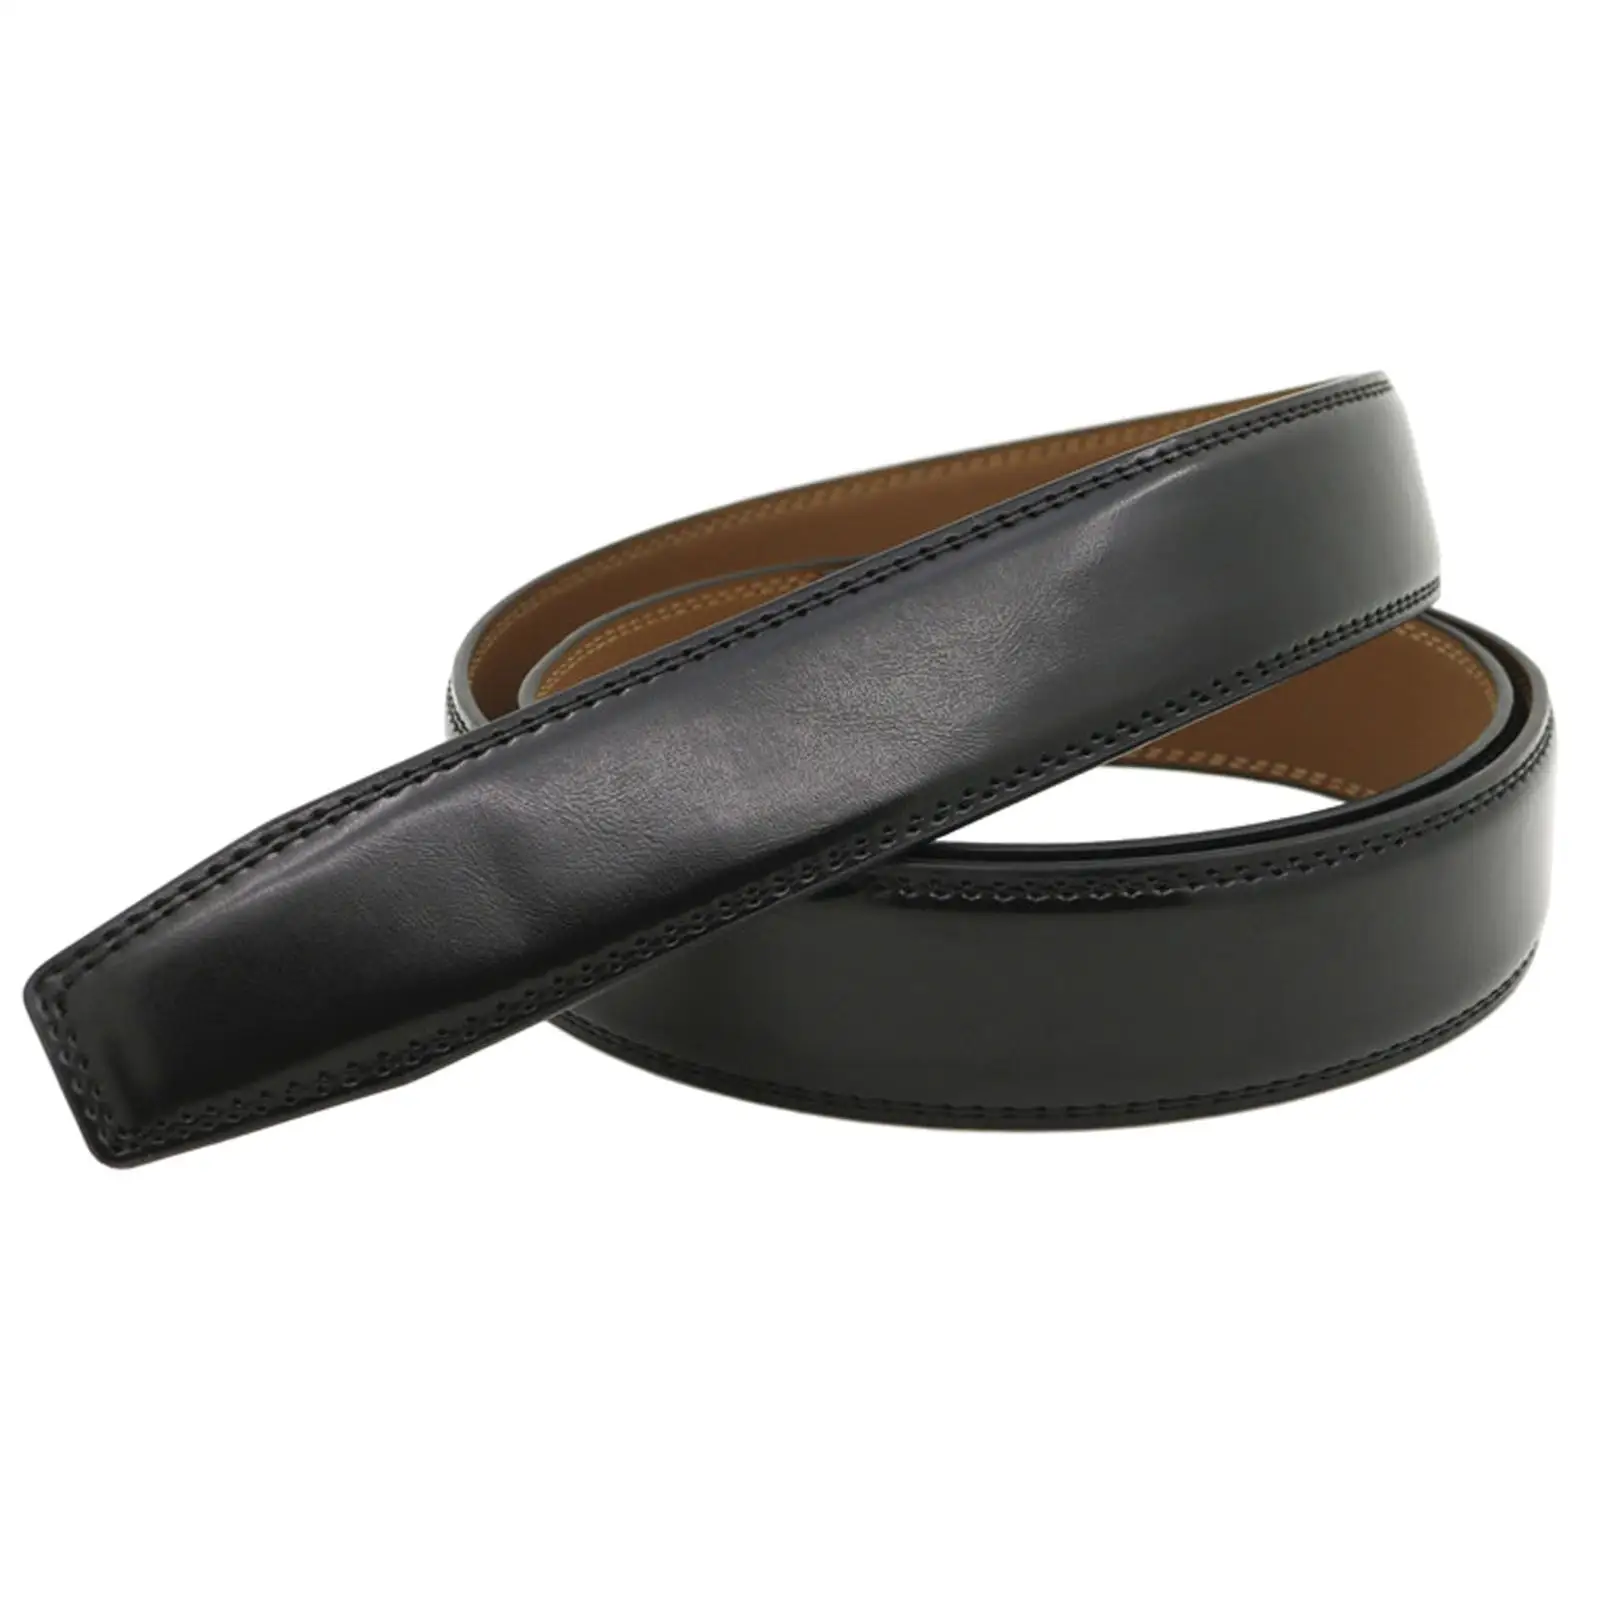 3.5cm Wide Leather Belt Without Buckle Replacement Waistband Dress Belt Casual Strap for Jeans Trousers Adults Men